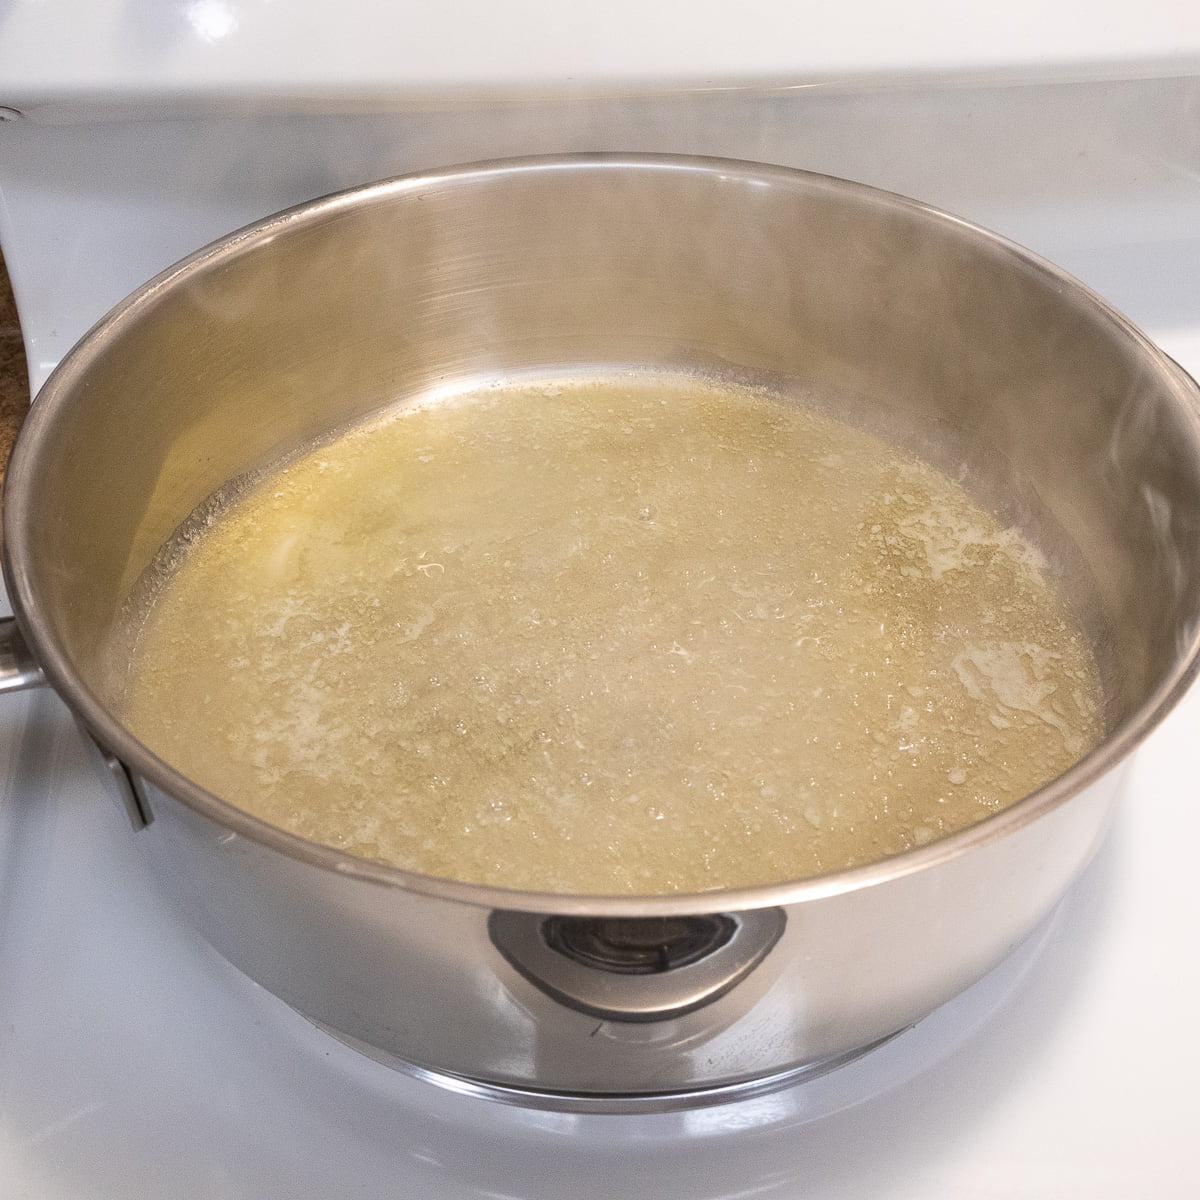 Butter melted in pan